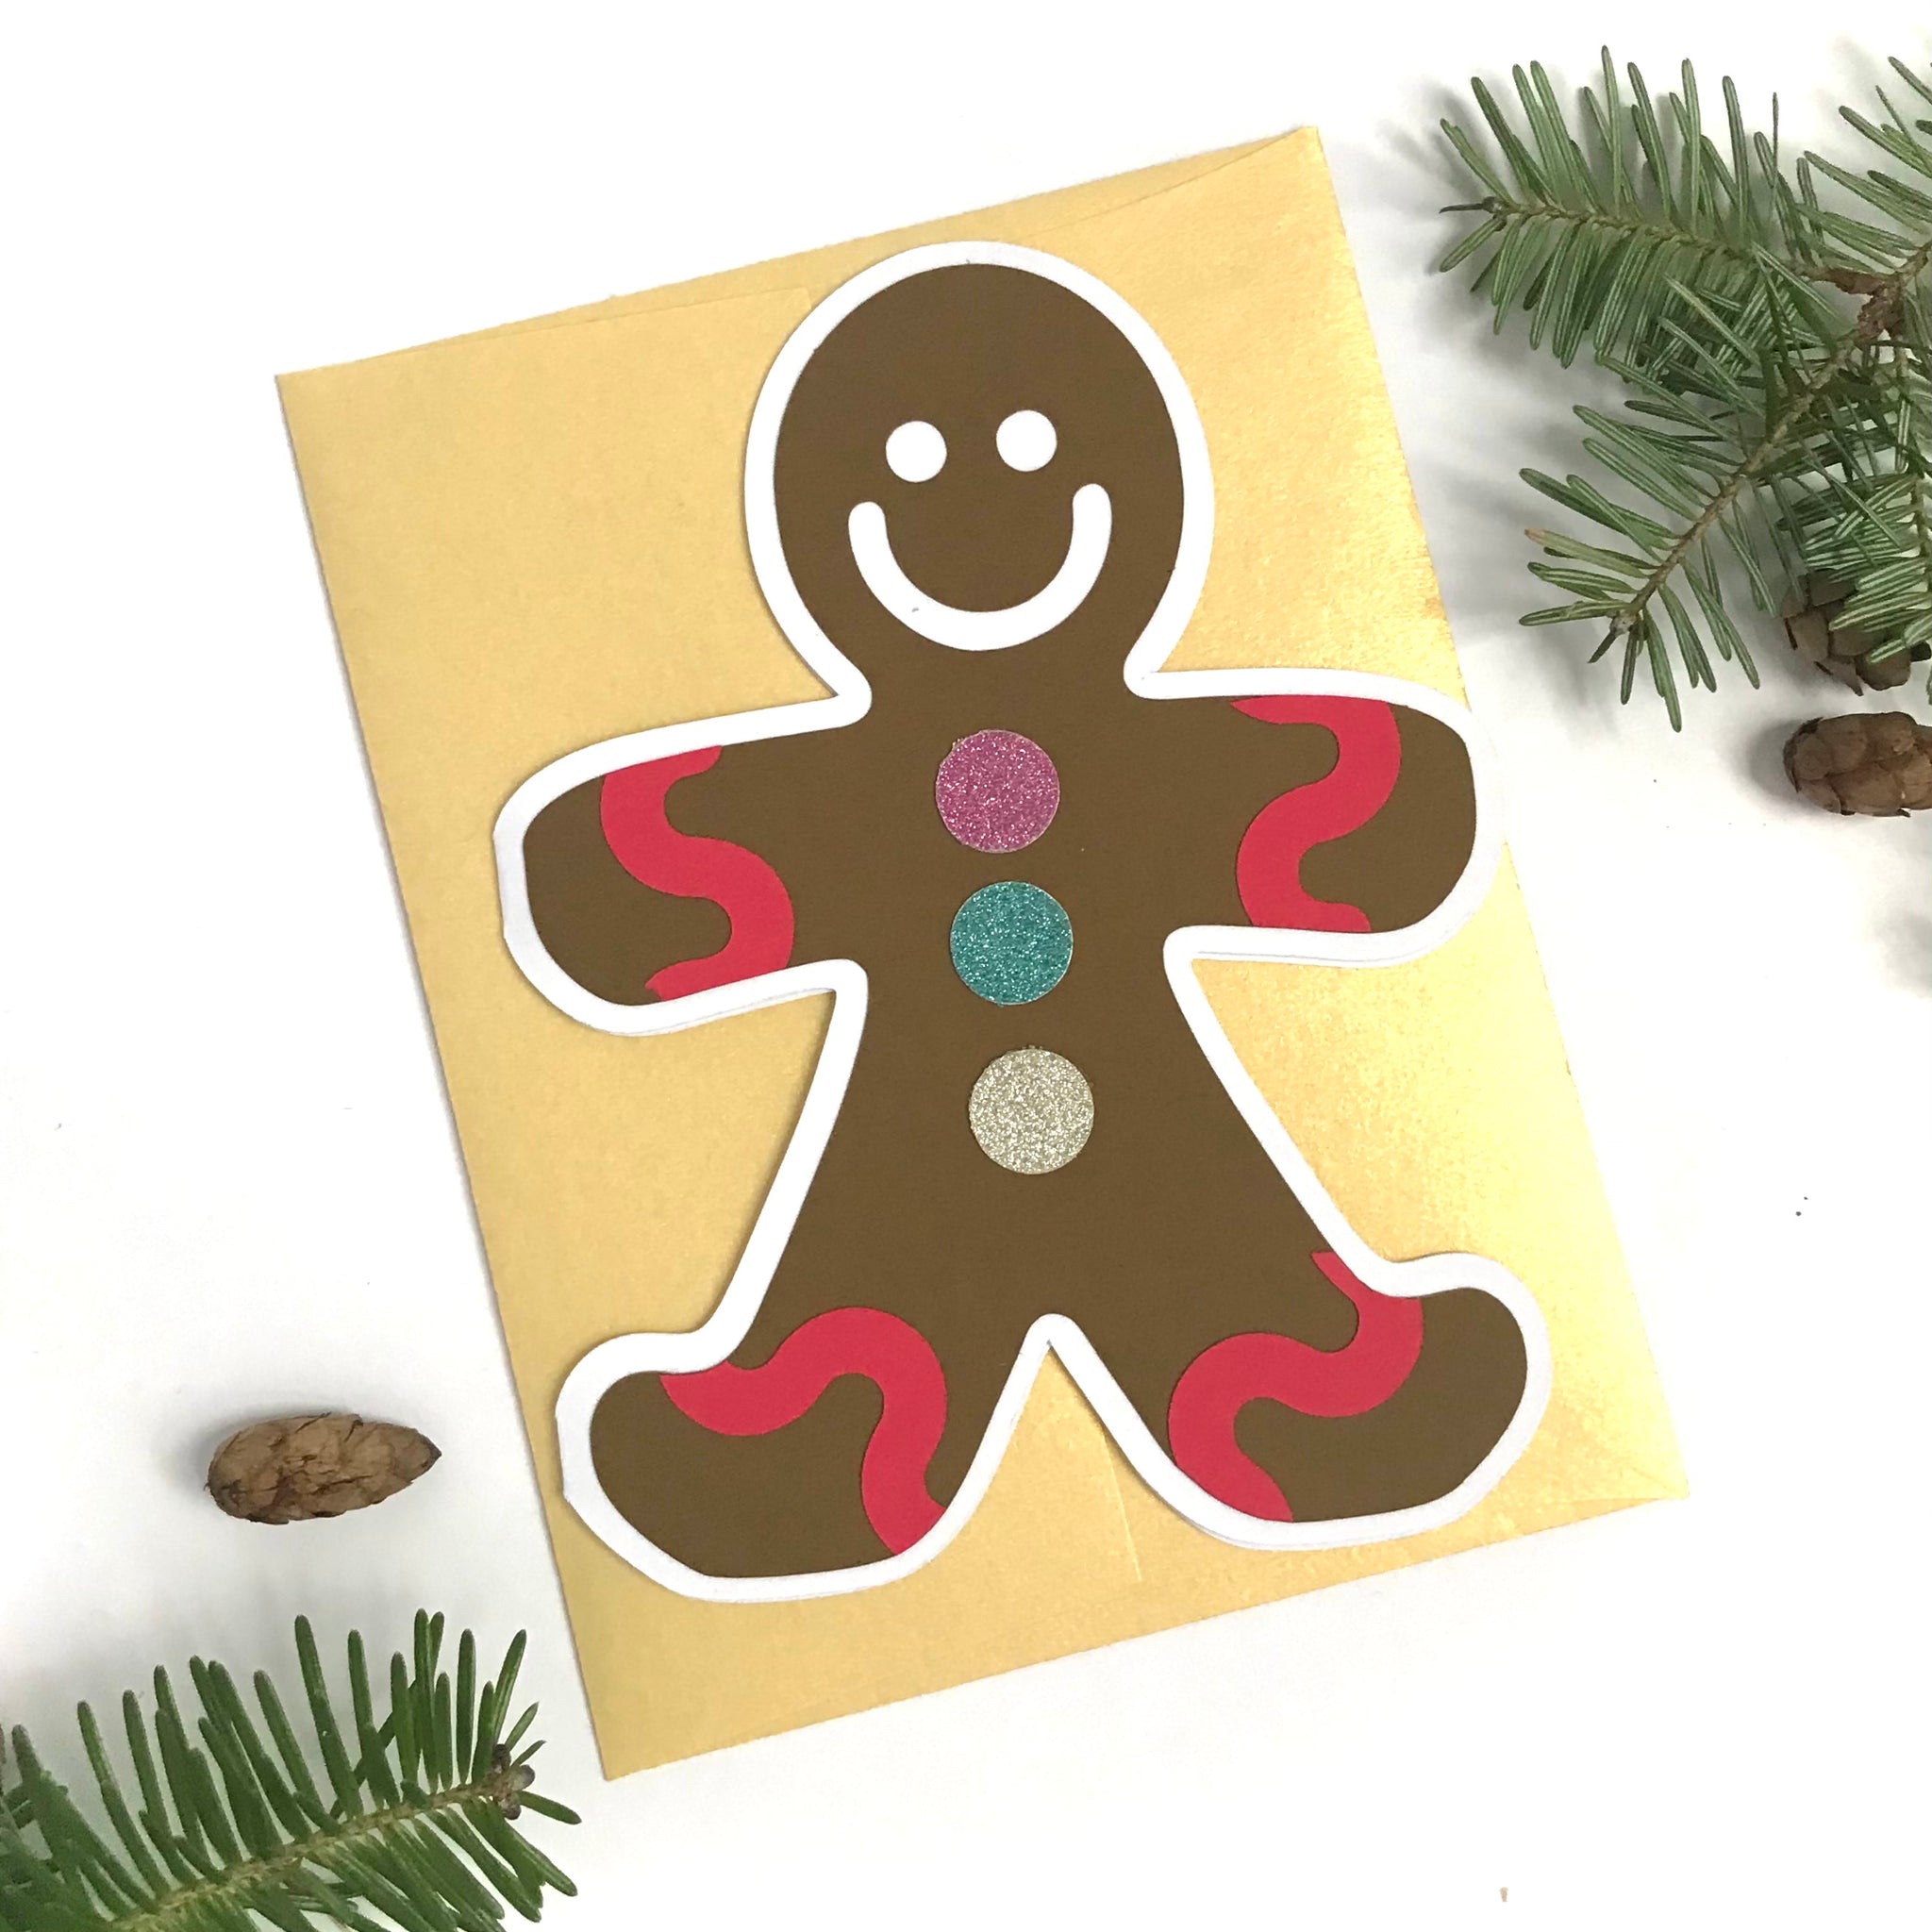 A happy little gingerbread man shaped card is laying on top of a gold envelope, against a white background with a little bit of pine tree and pine cones in the top right and bottom left corners.  The card has large glittery buttons and bright red wavy trim at the wrist and ankle of the cookie shaped card